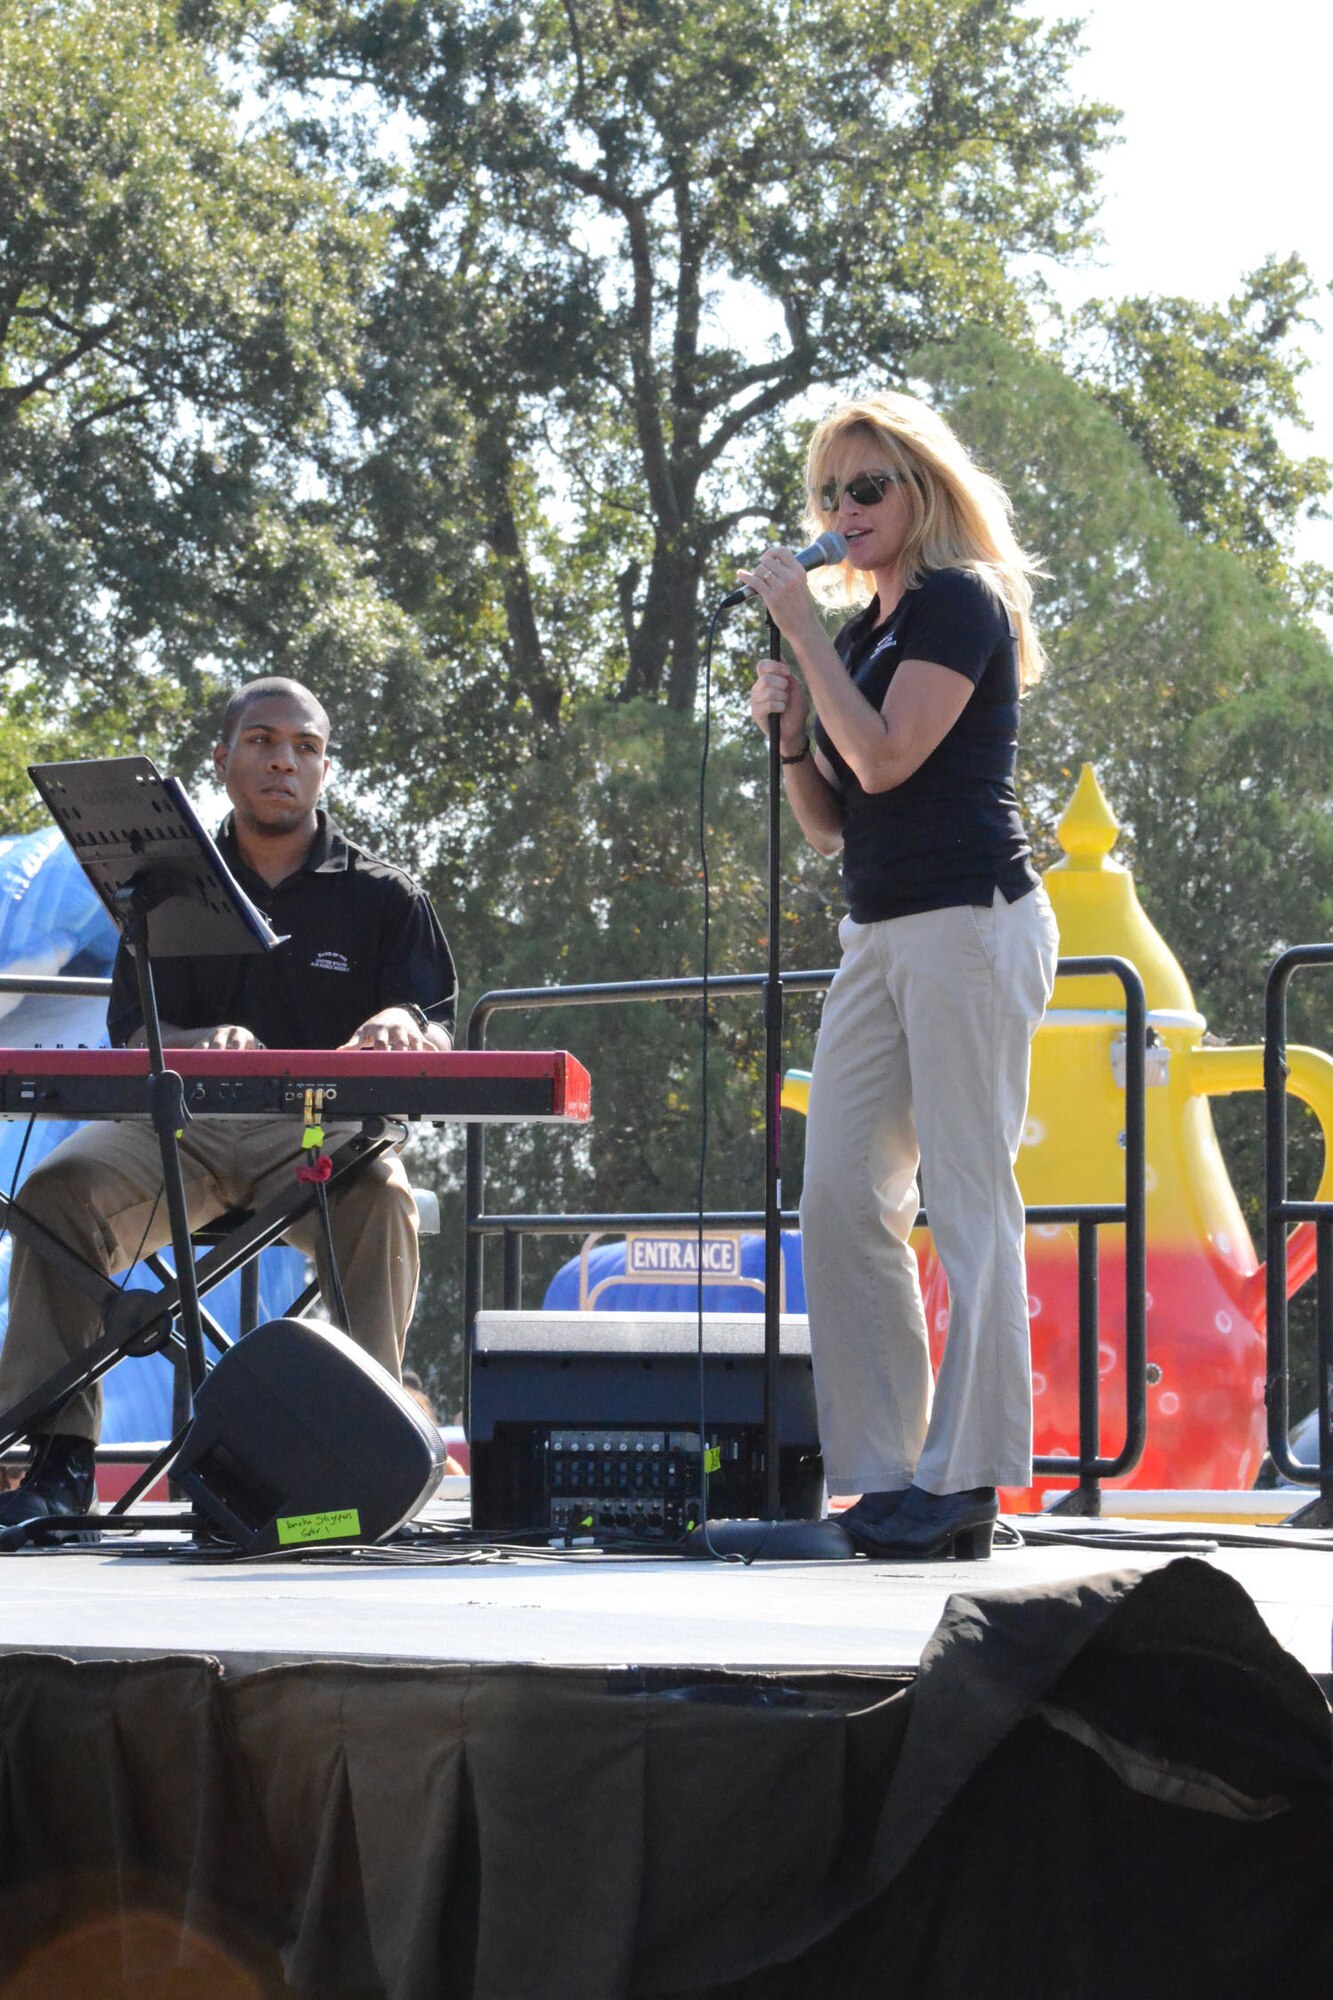 Vocalist Tech Sgt. Alyson Jones and keyboardist Airmen 1st Class Tim Davis, from Band of the U.S. Reserve provide musical entertainment to spectators at this year’s event.(U. S. Air Force photo/Ed Aspera)